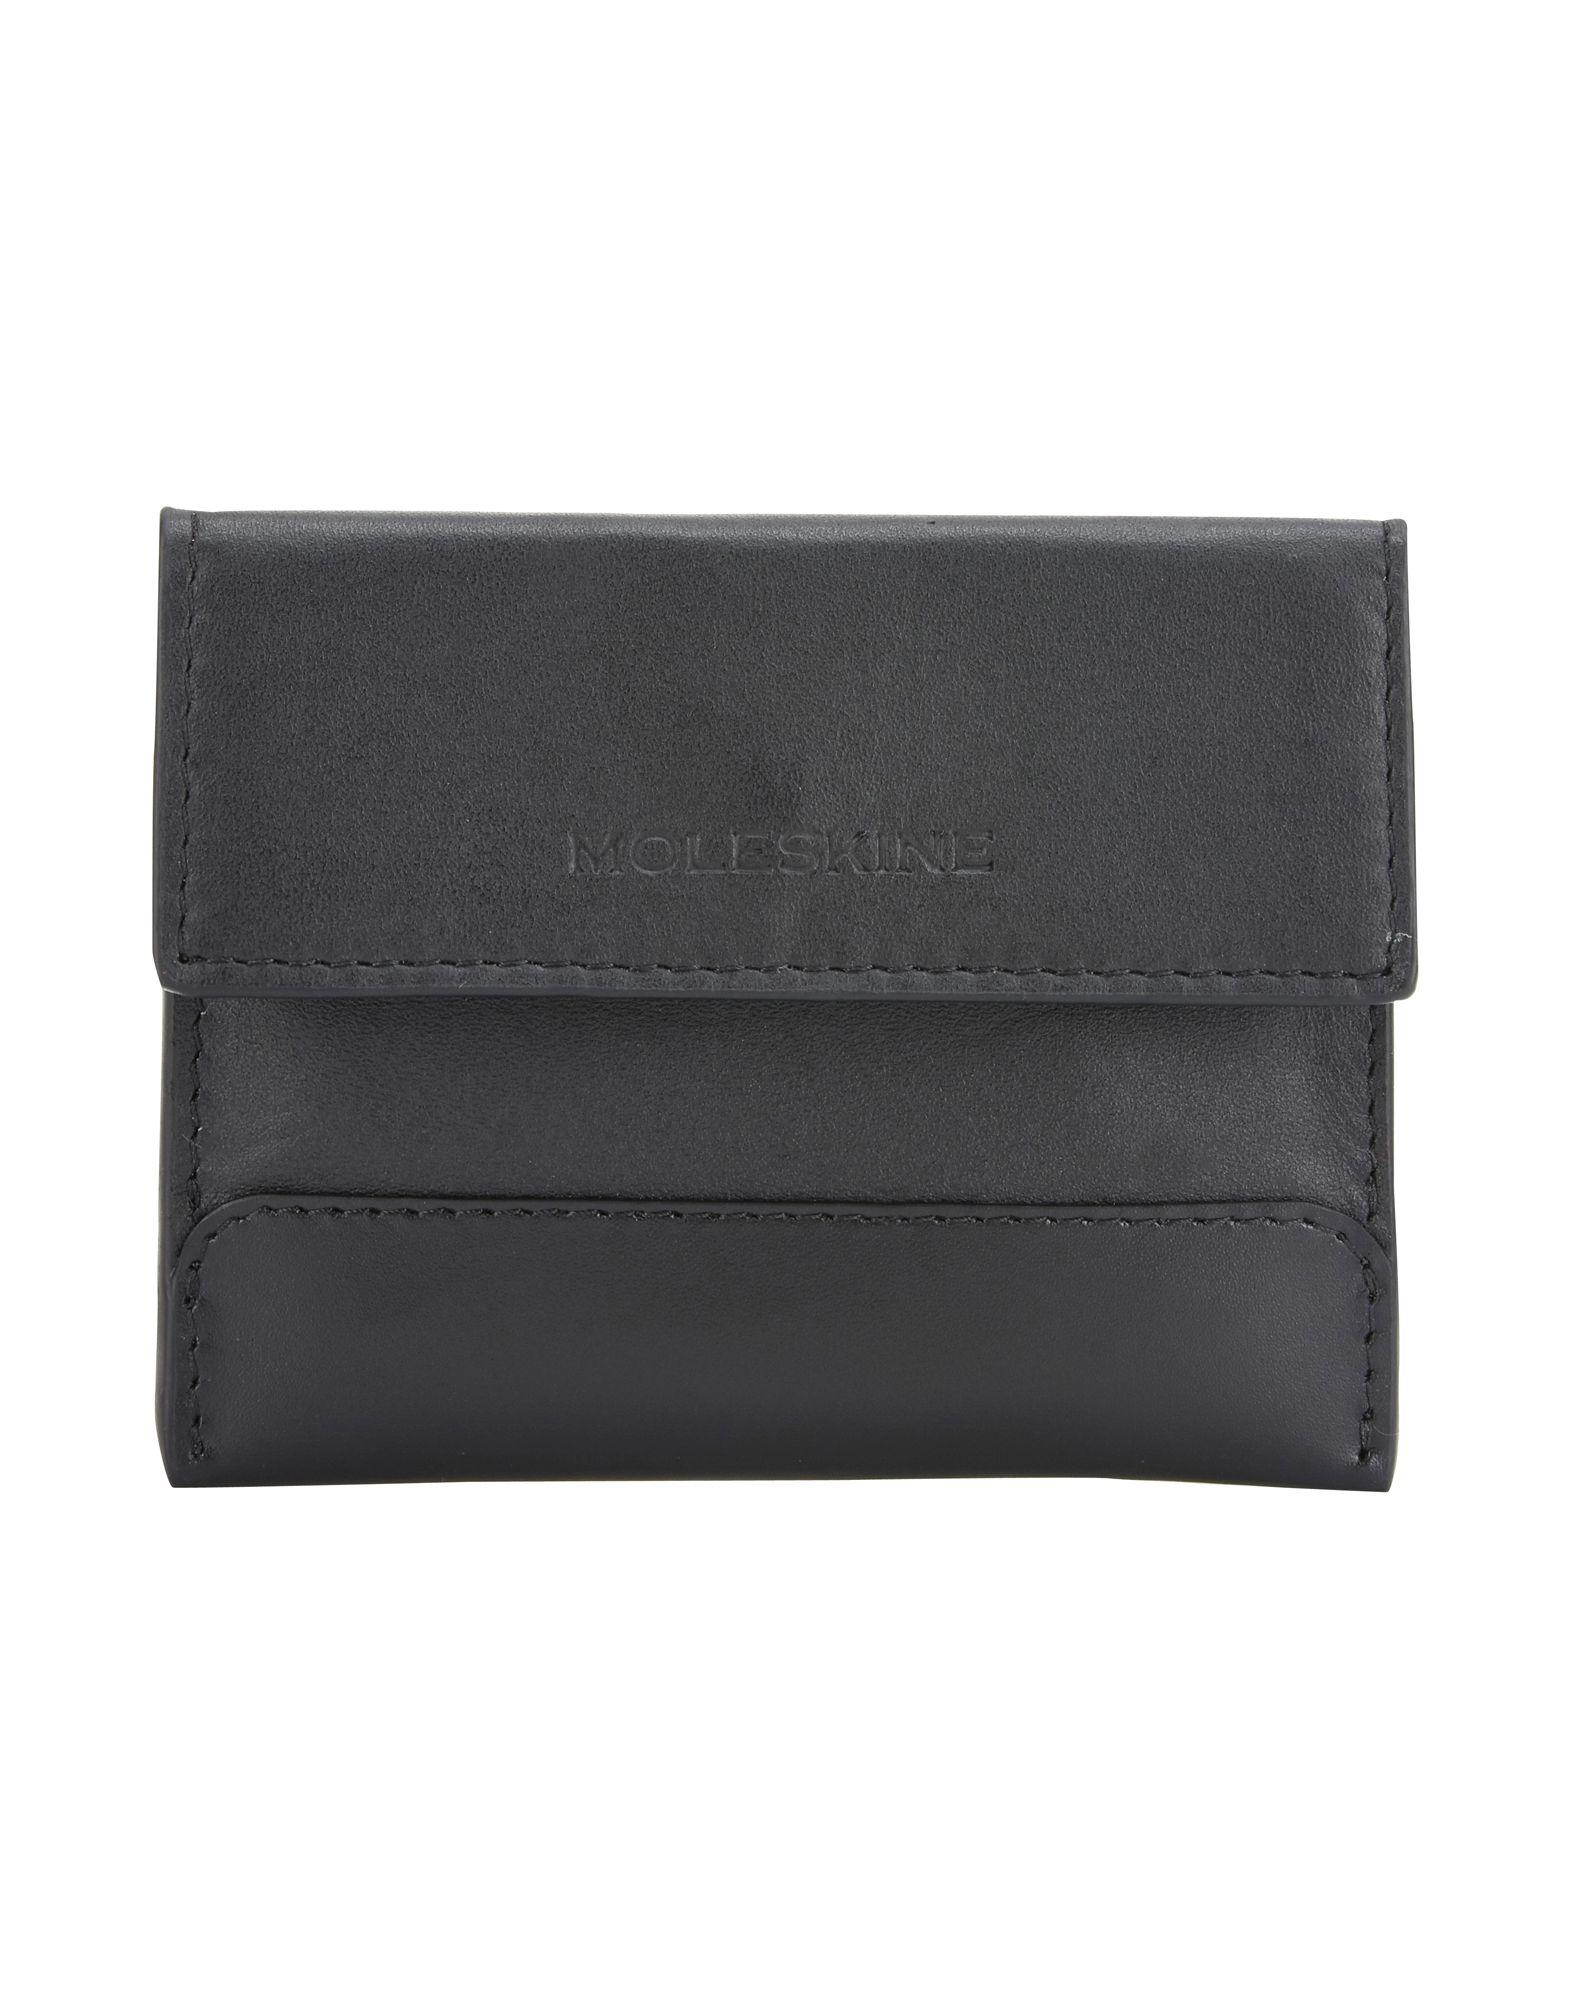 Moleskine Leather Coin Purse in Black - Lyst